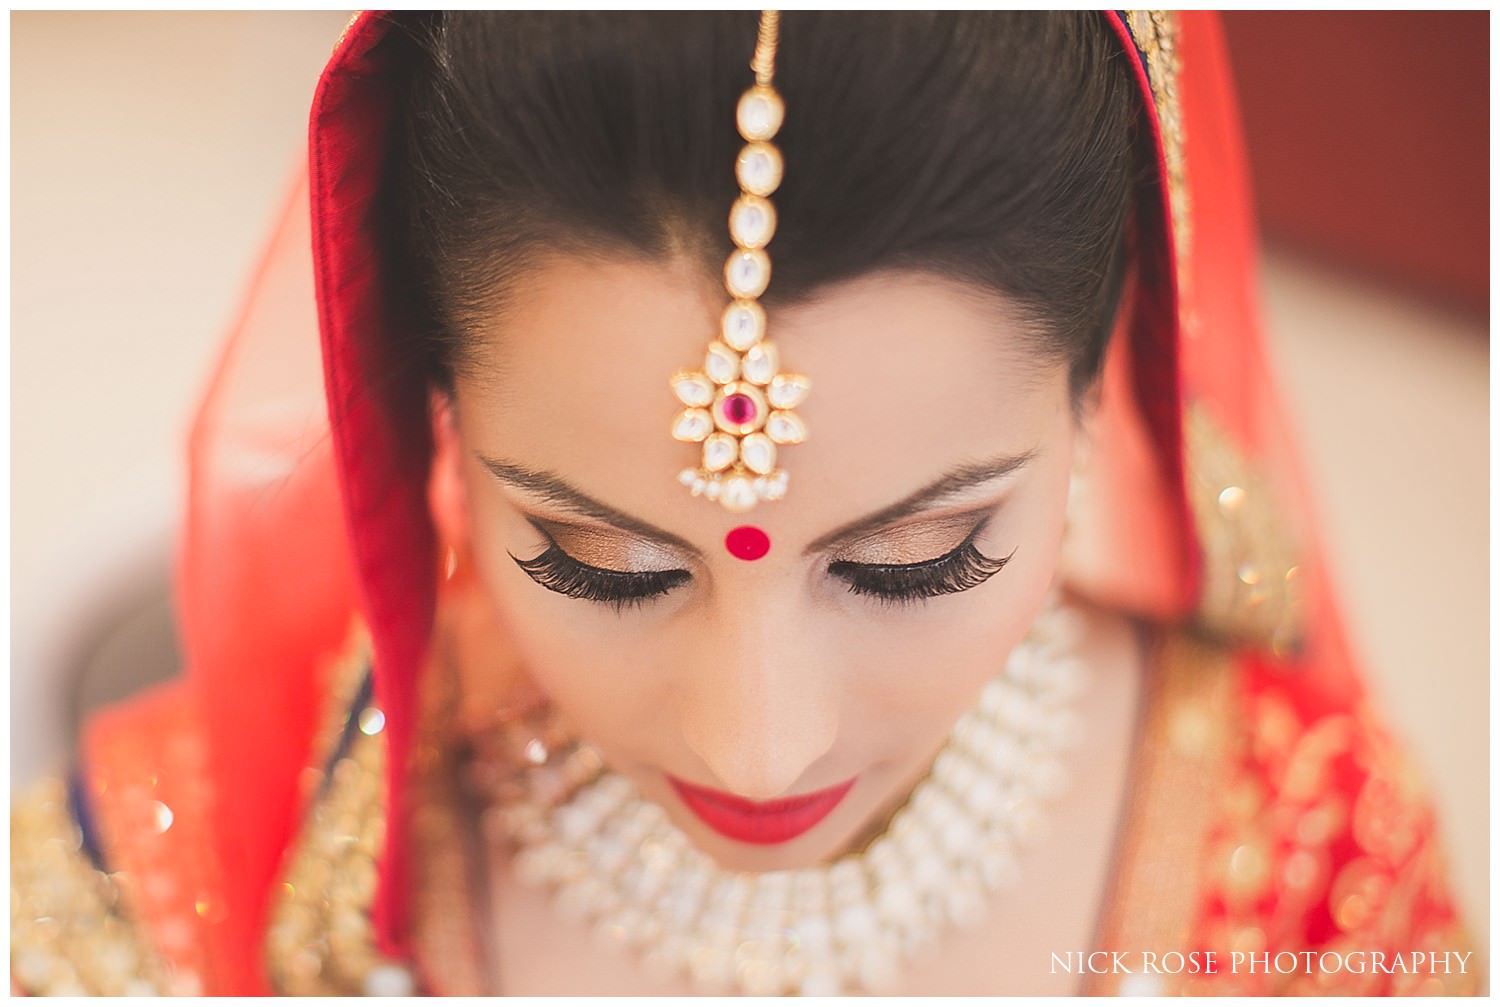  Beautiful Indian bride before a Hindu wedding at and East Wintergarden wedding in Canary Wharf London 